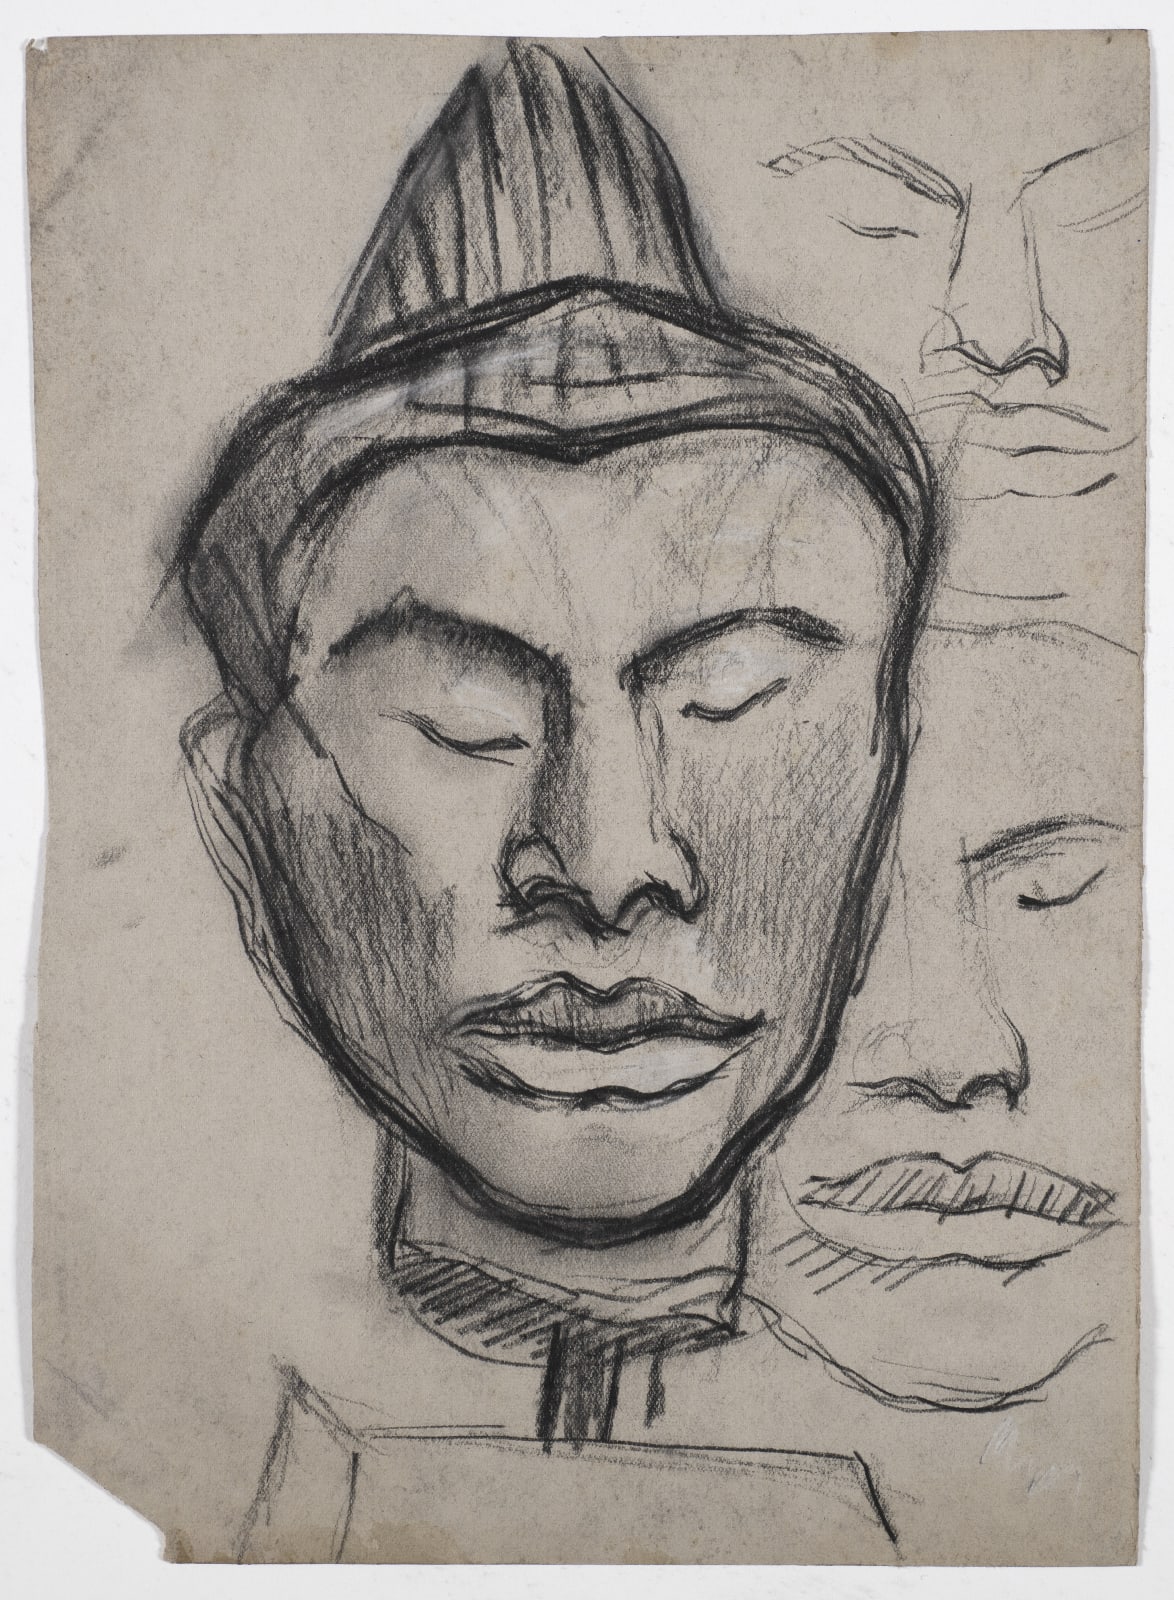 Untitled, British Museum study, c. 1950 Charcoal on paper 33.7 x 24.3cm The Gustav Metzger Foundation